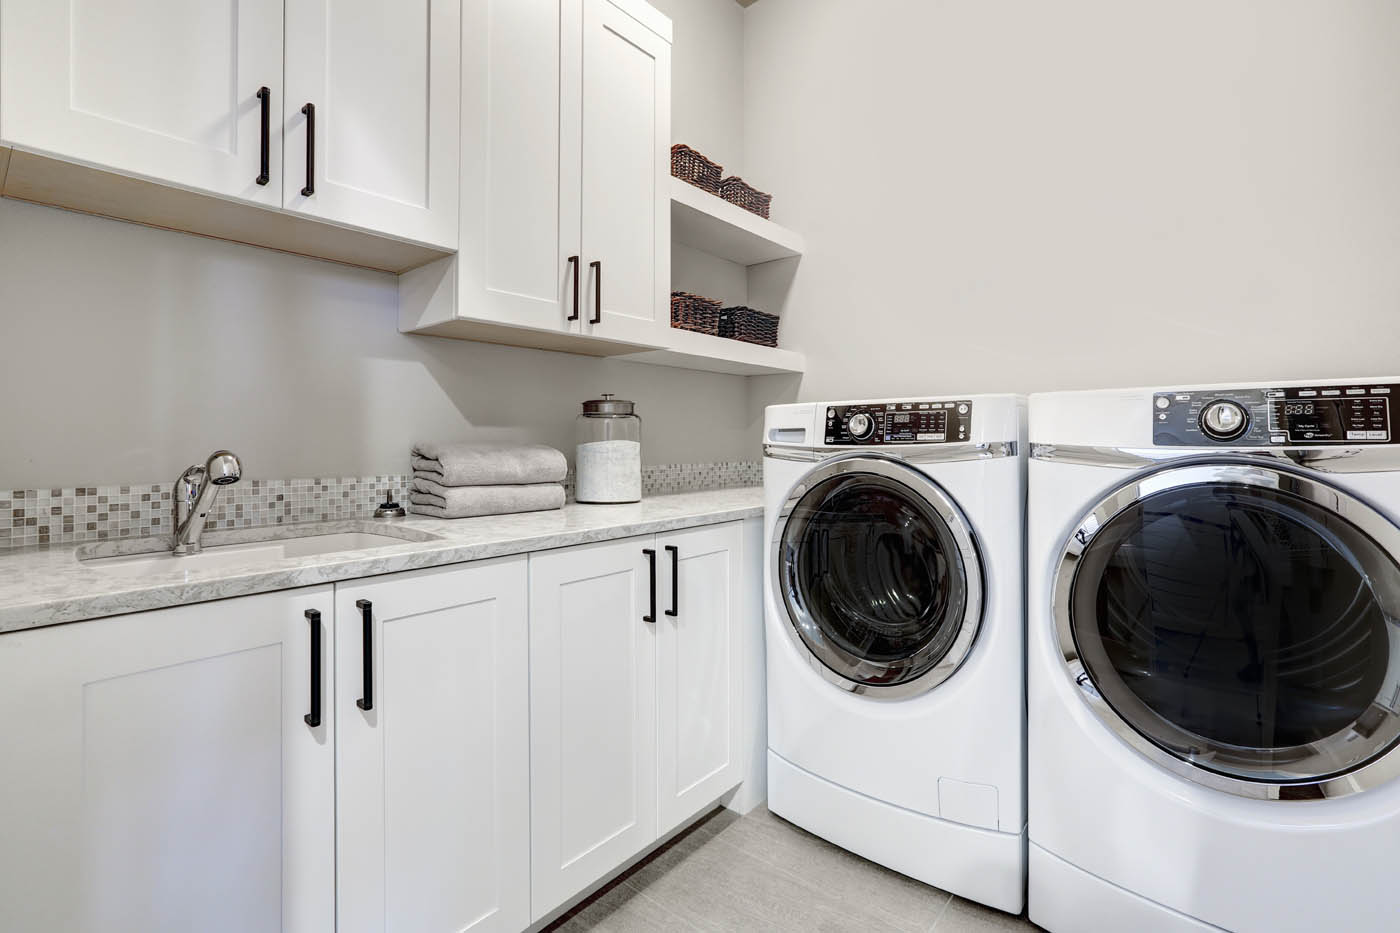 A picture of a laundry room inside a home, WyattWorks Cleveland.